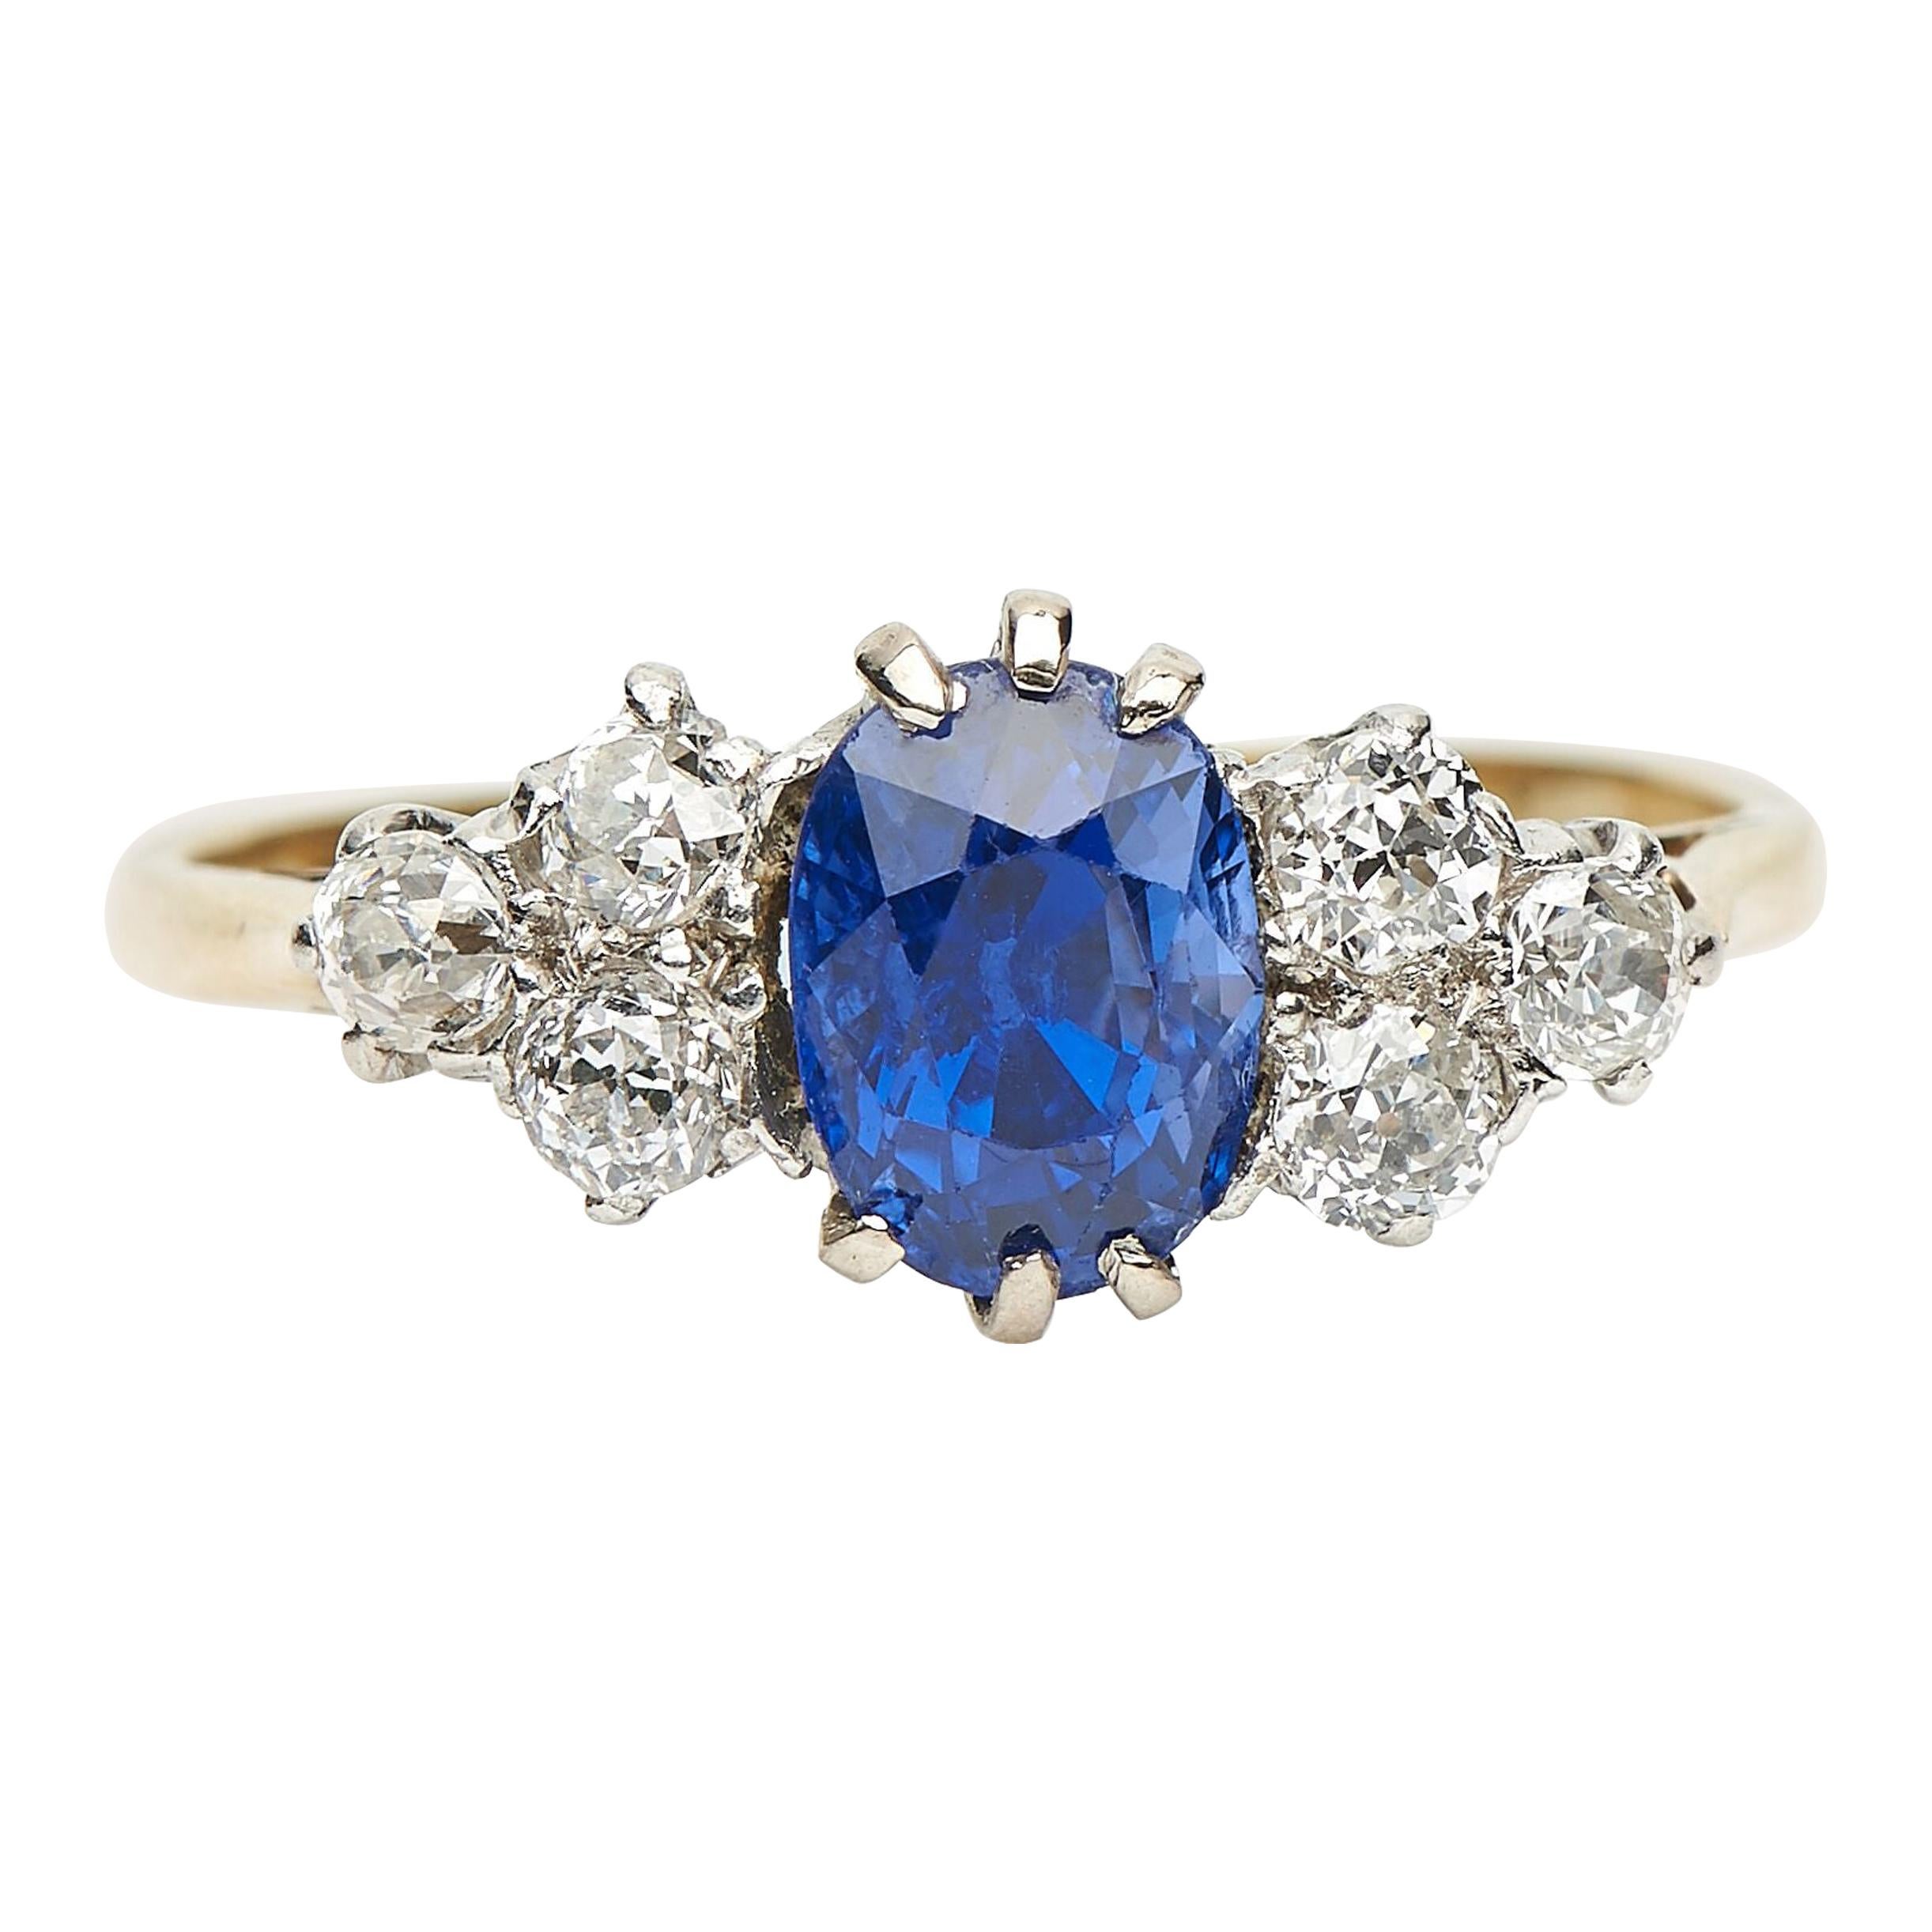 Antique, Victorian, 18 Carat Yellow Gold, Sapphire and Diamond Engagement Ring